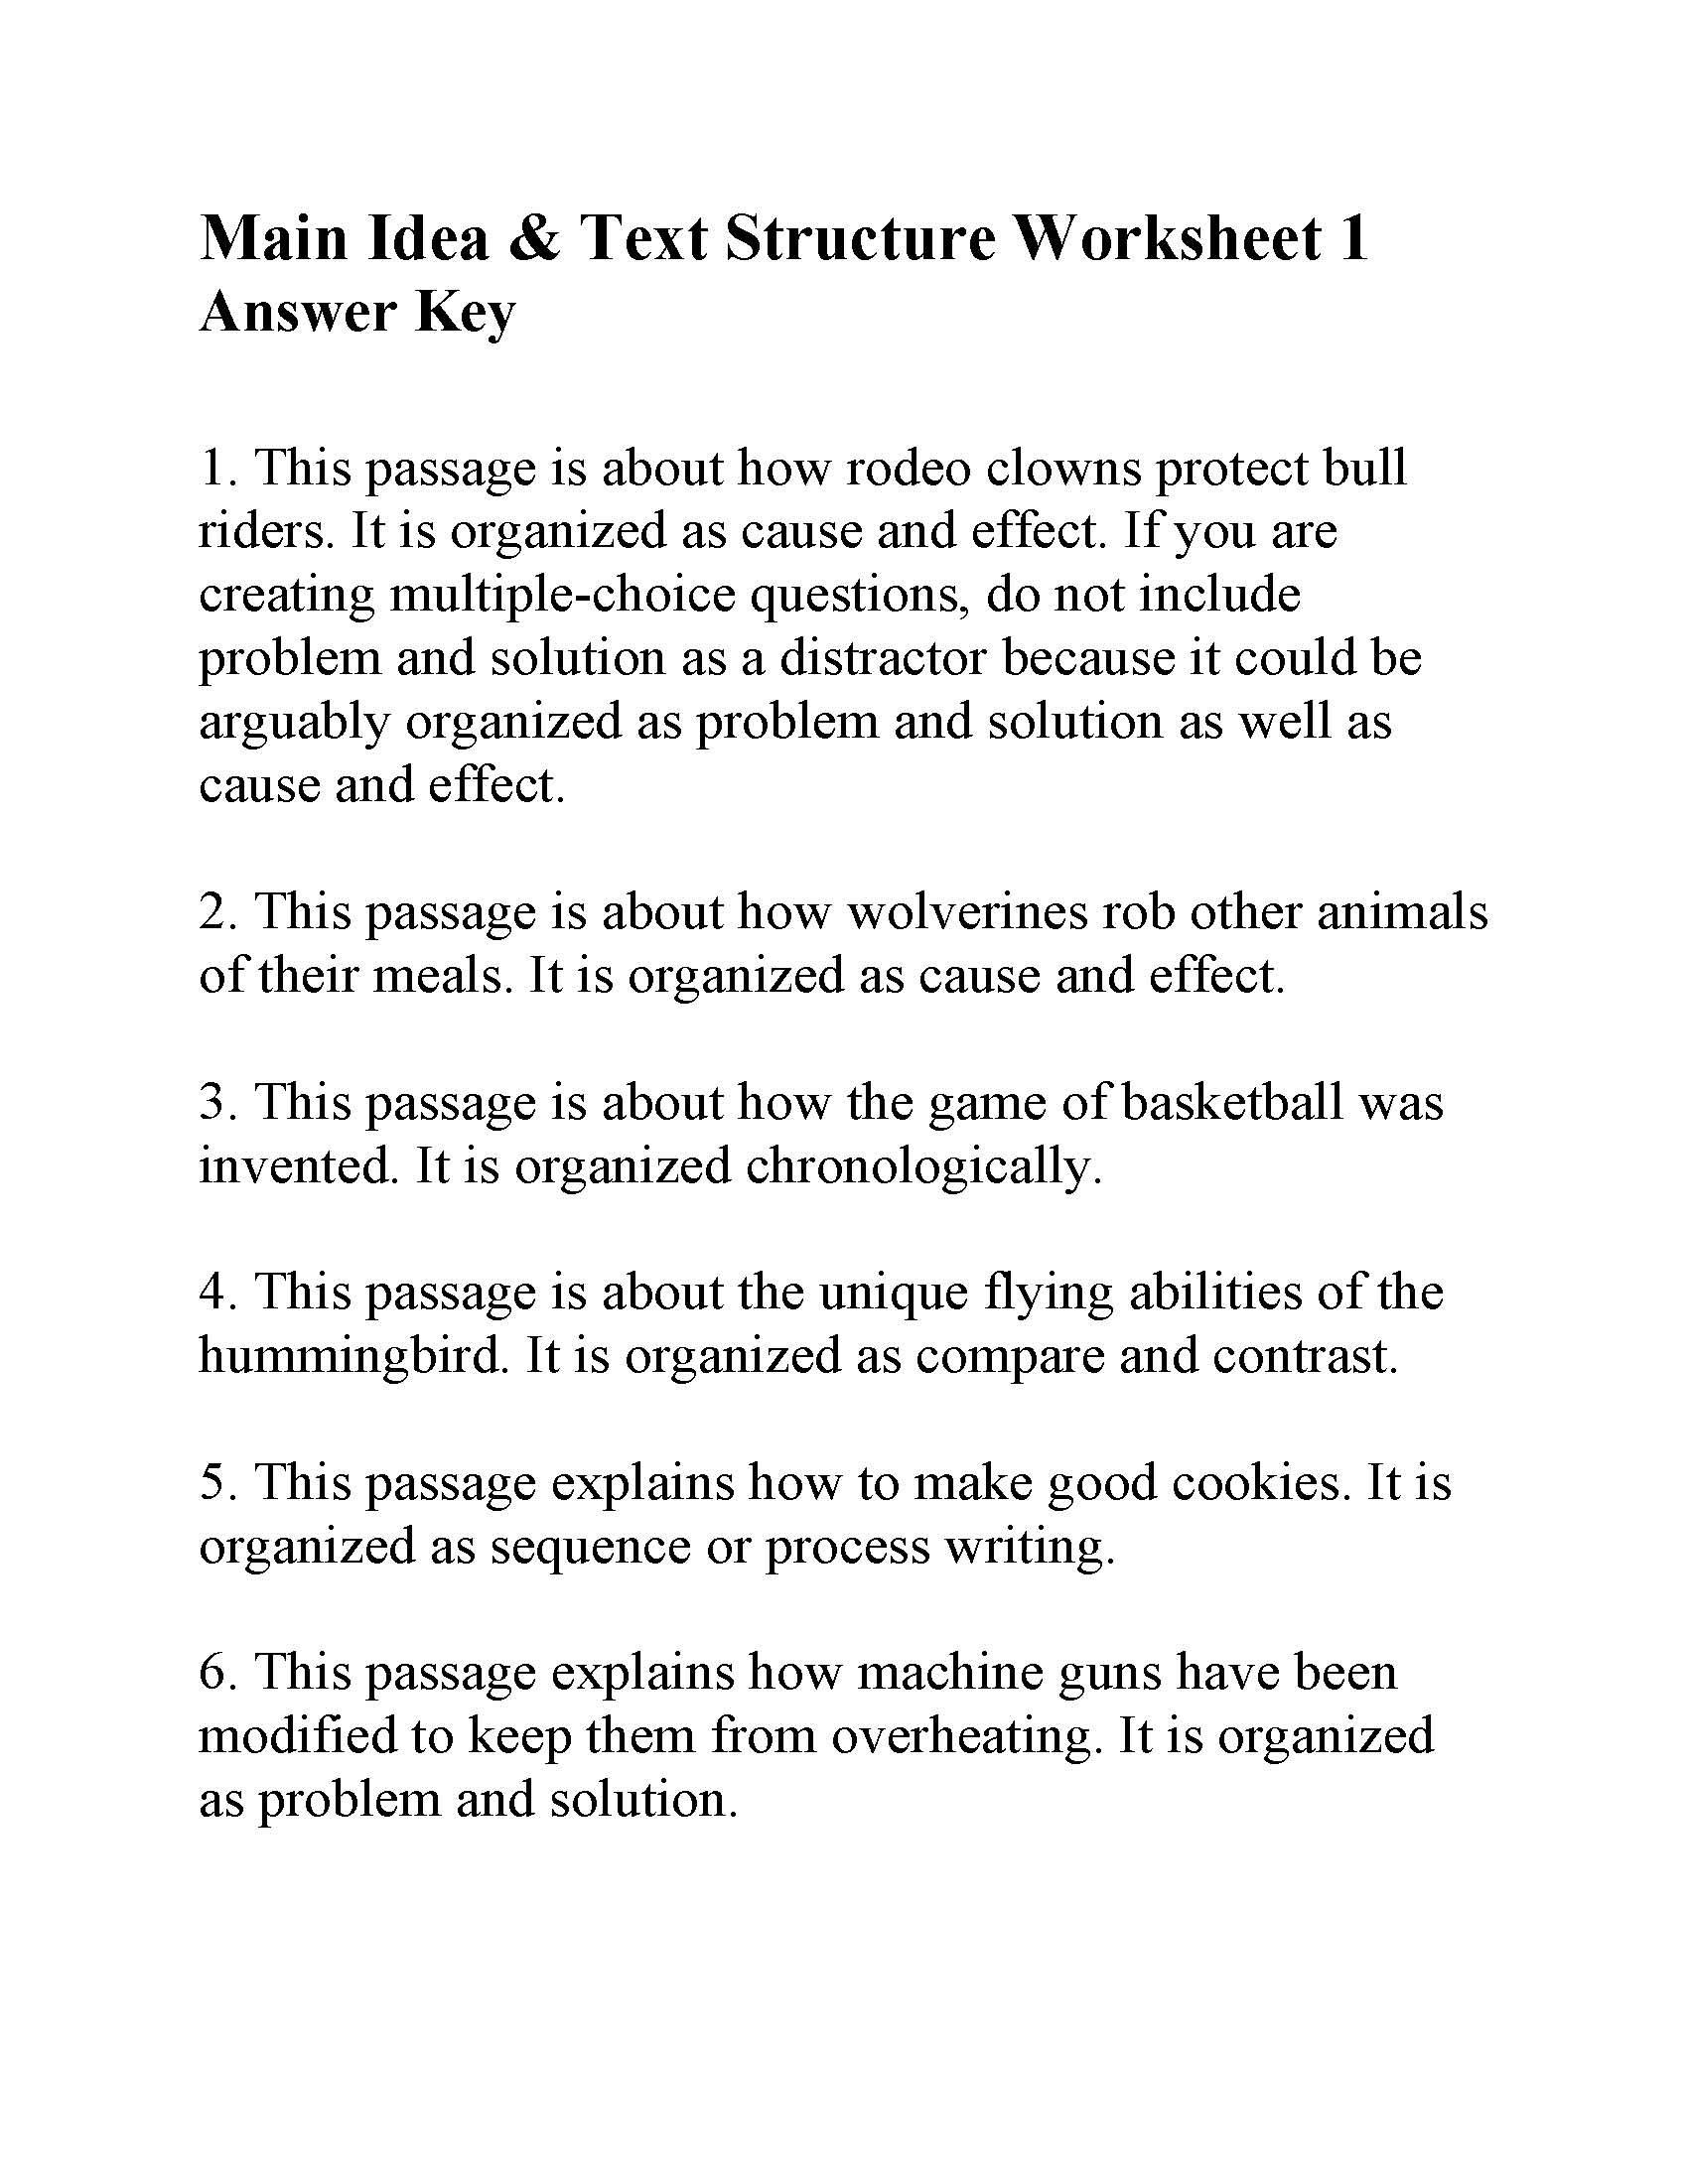 Text Structure Worksheet 4th Grade This is the Answer Key for the Main Idea and Text Structure